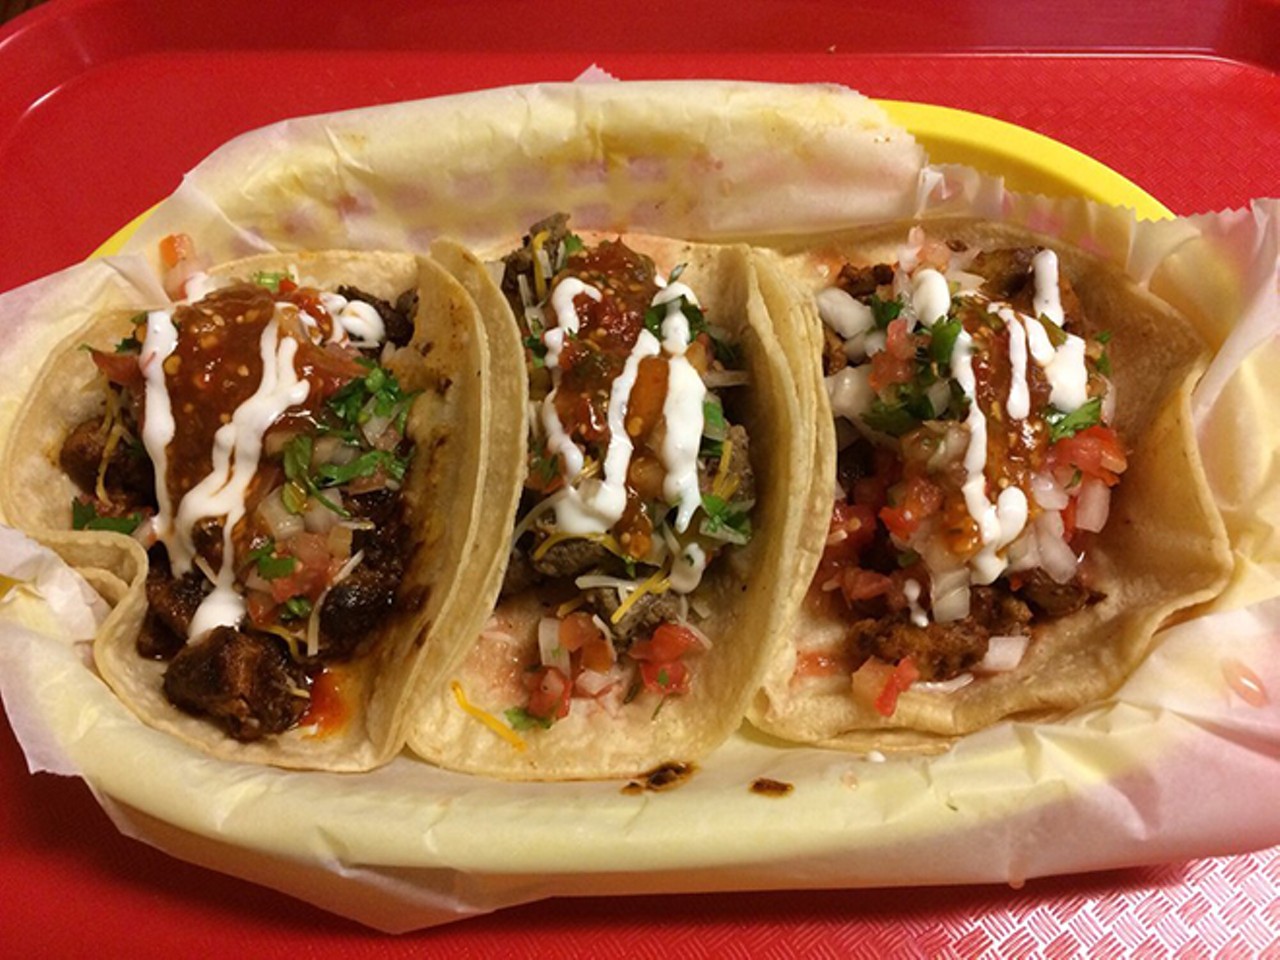 Tacos El Rancho
multiple locations
Generous taco basket and platter options make this an easy choice for anyone craving Mexican fare.
Photo via Yelp